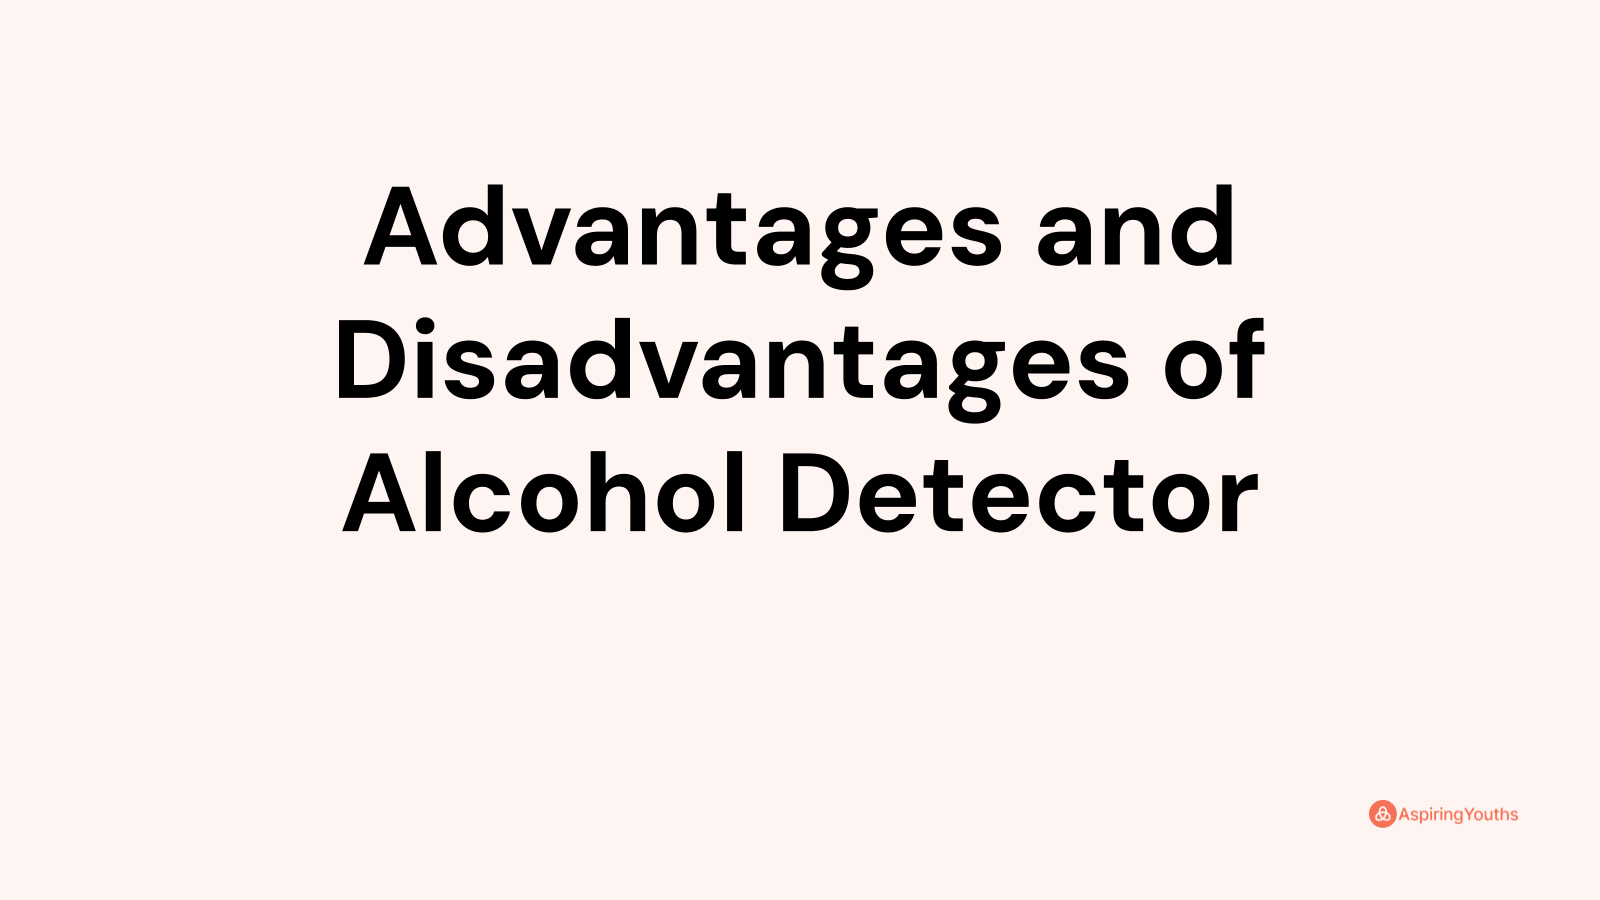 Advantages and disadvantages of Alcohol Detector